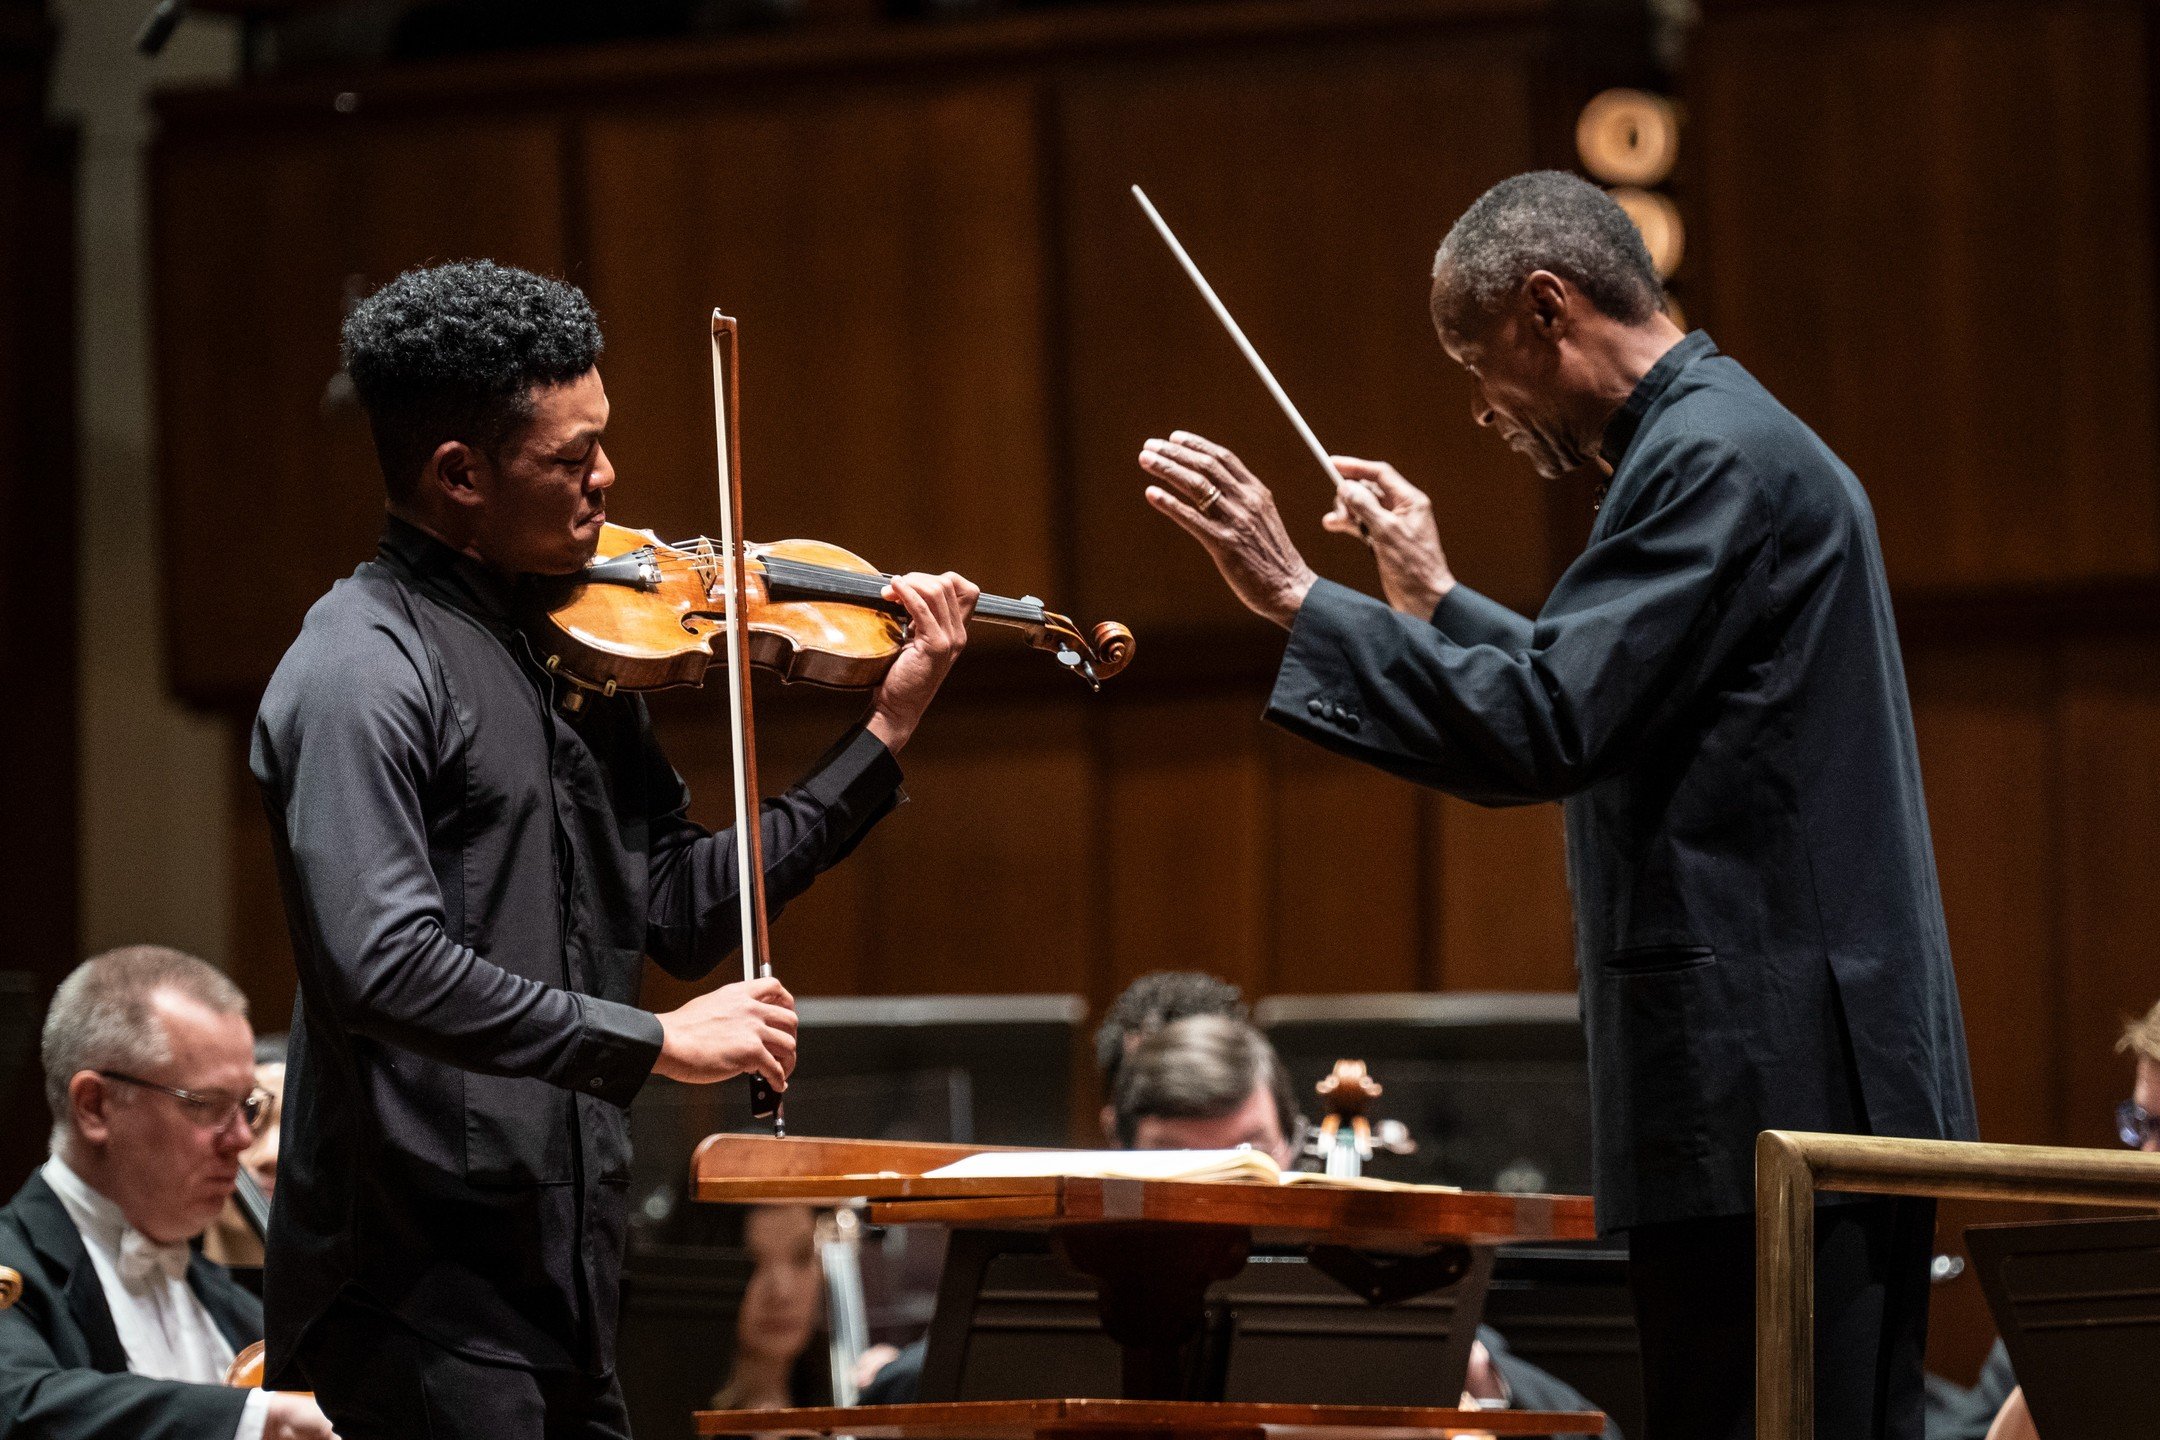 Randall Goosby @ItsGooz on stage with the National Symphony Orchestra @NatSymphonyDC and Thomas Wilkins performing Mendelssohn&rsquo;s Violin Concerto at the @KennedyCenter last night! 

📷: Scott Suchman